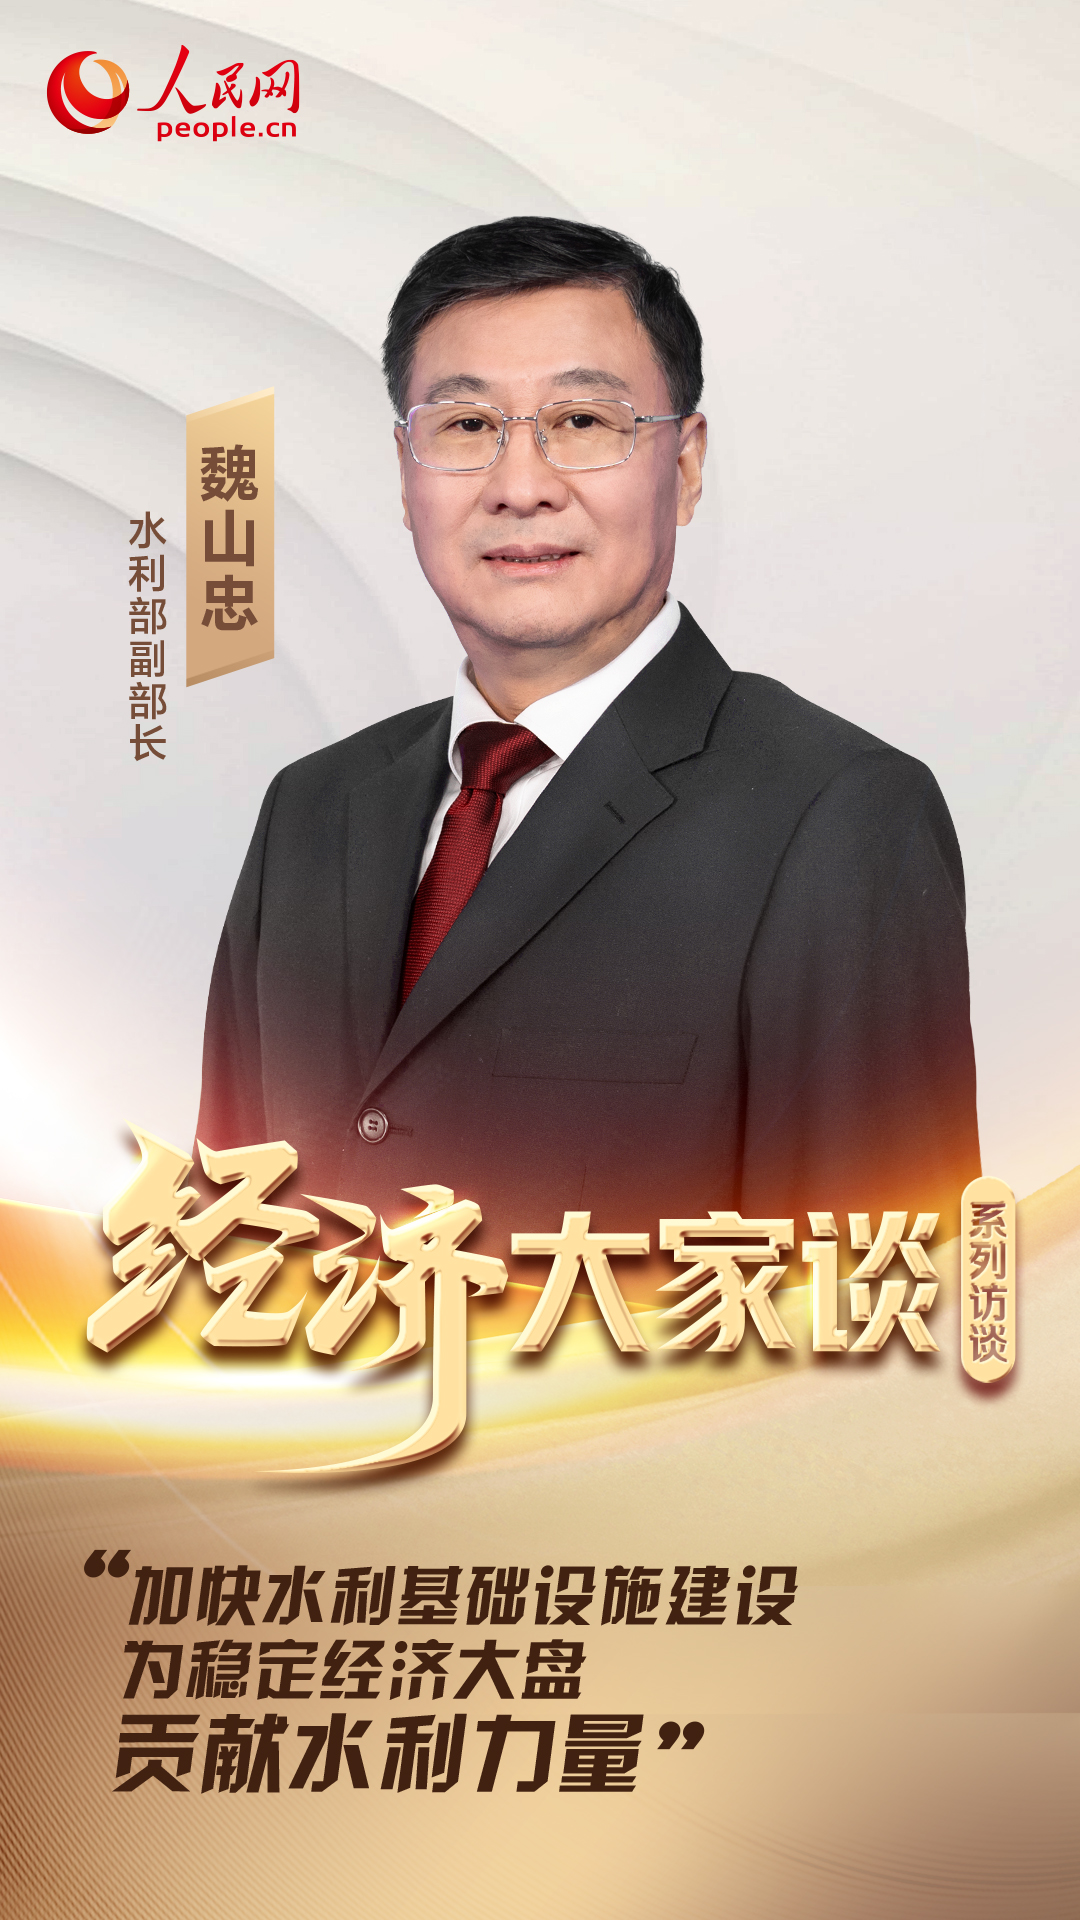 Wei Shanzhong, deputy minister of the Ministry of Water Resources, interviewed by the People's Daily Online 丨 Accelerate the construction of water conservancy infrastructure to stabilize the economic market contribution